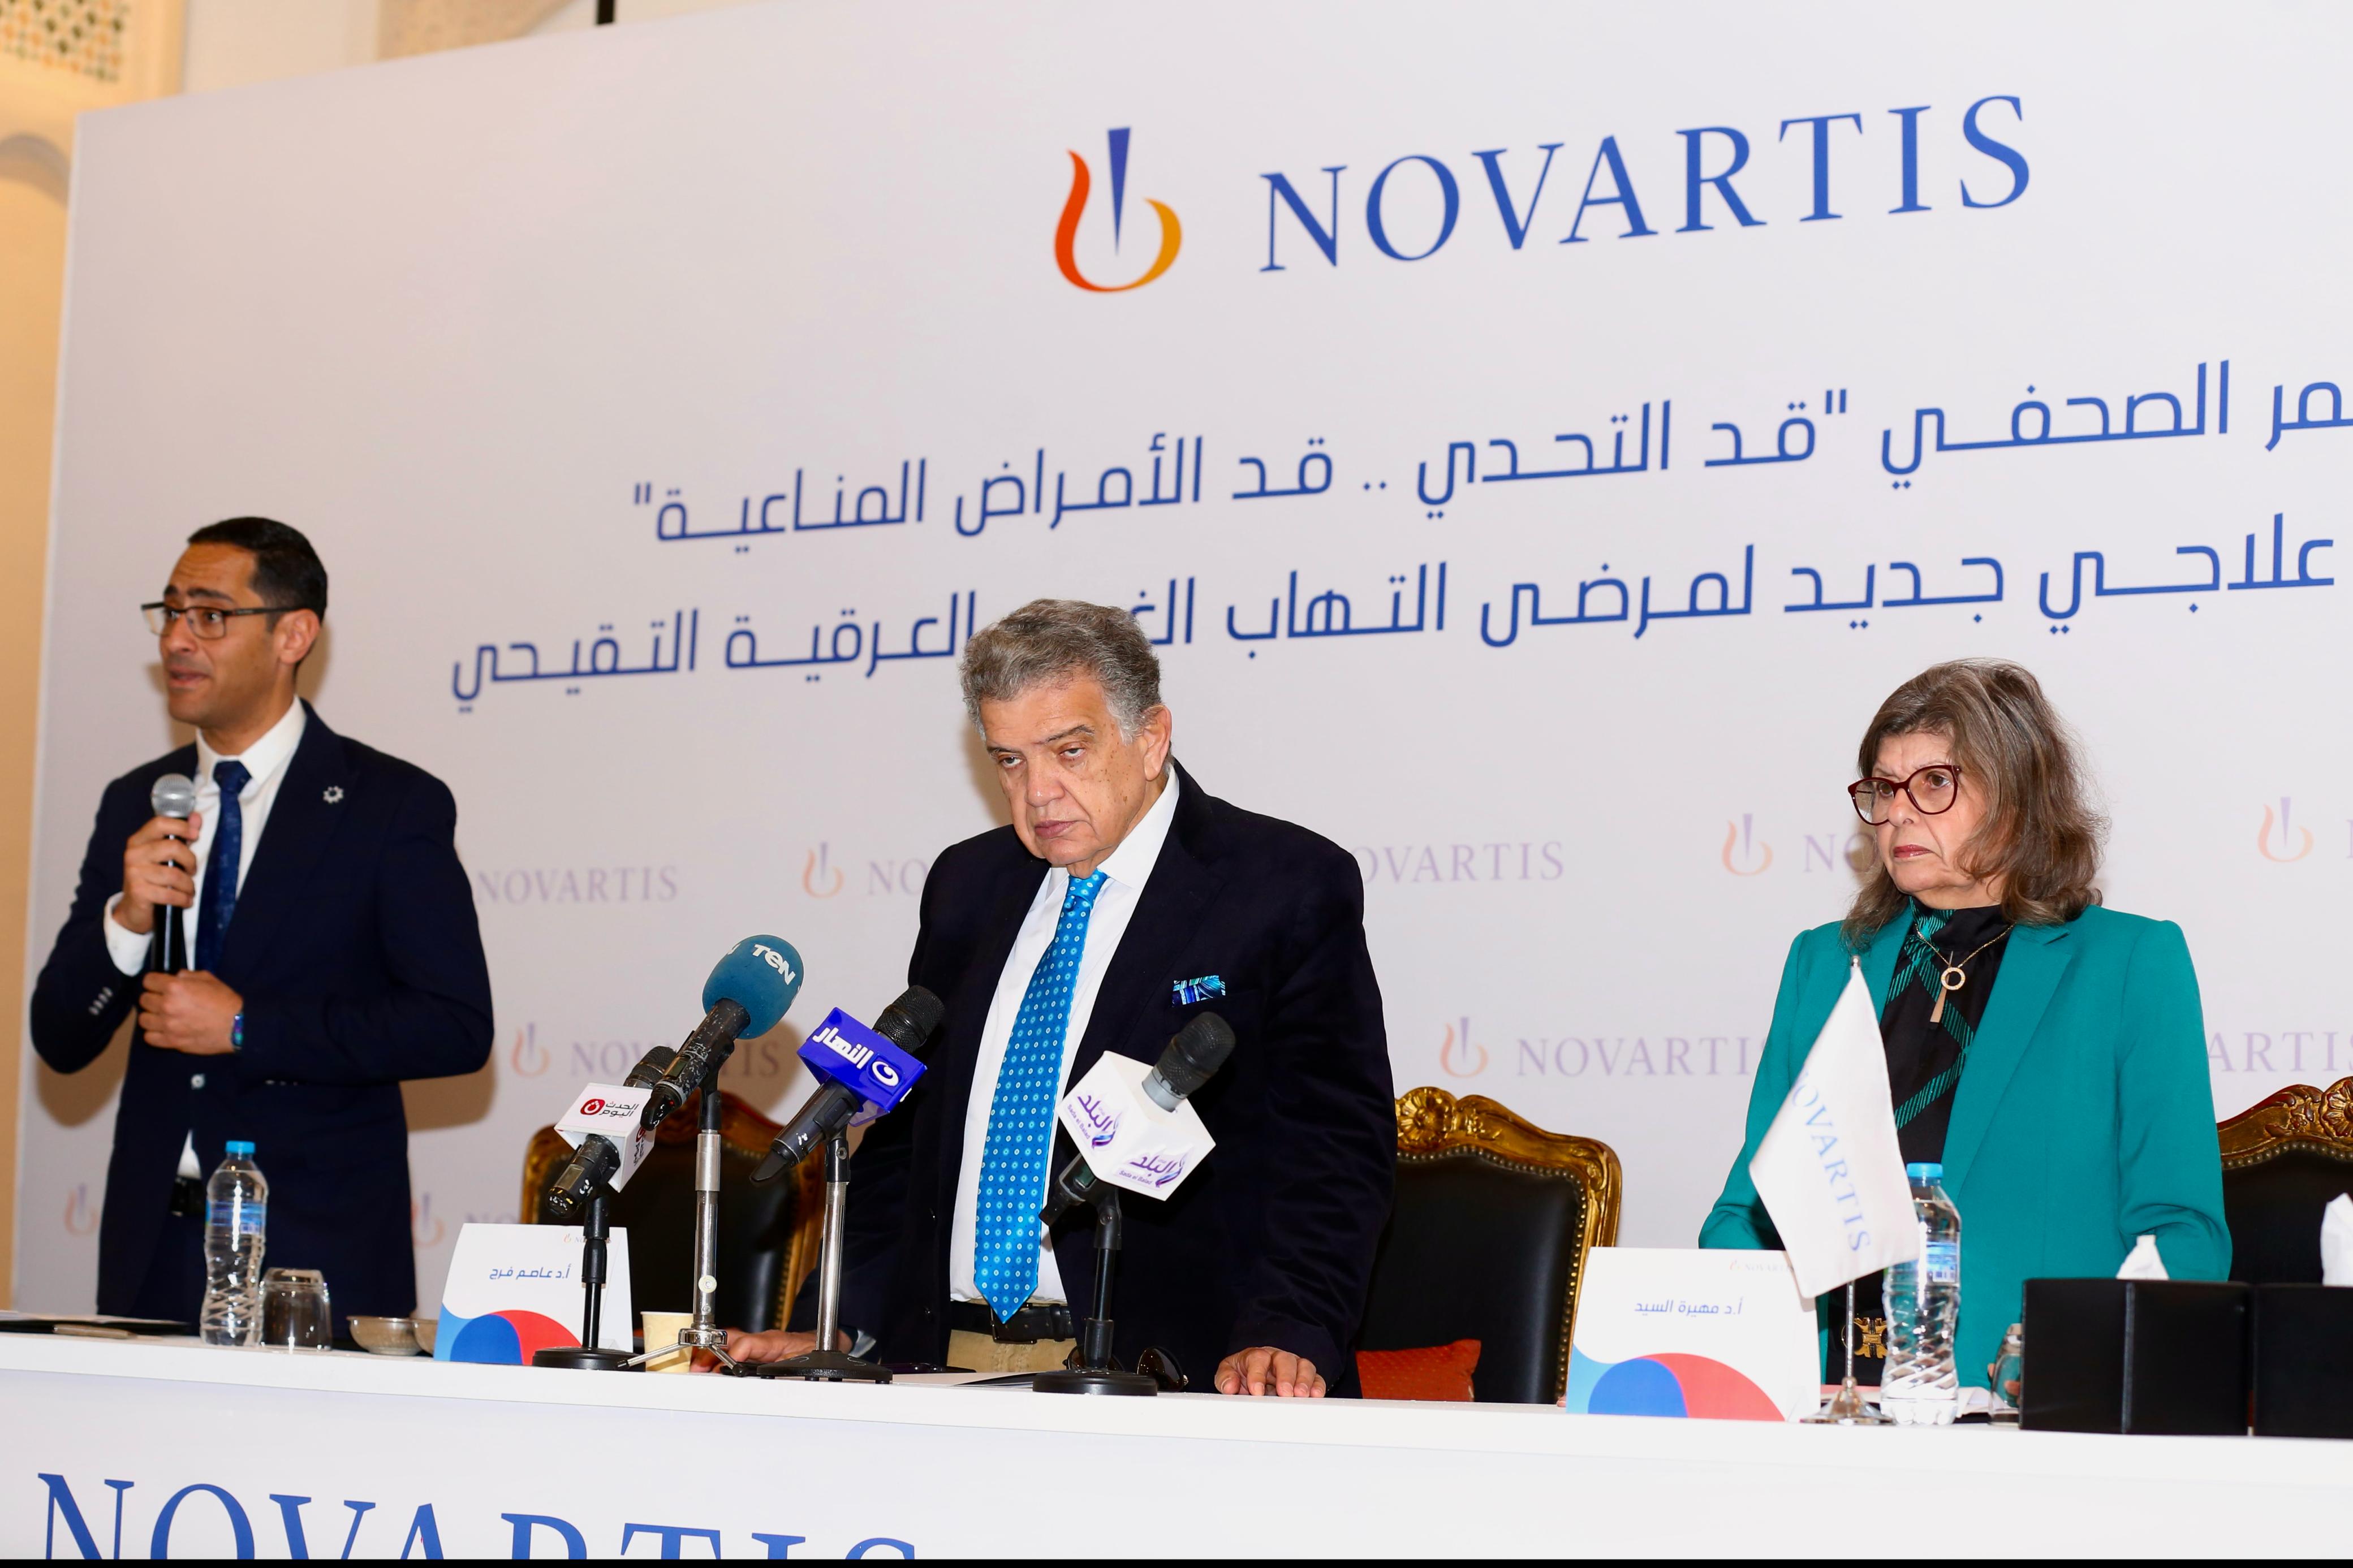 Novartis Egypt launches hidradenitis suppurativa awareness campaign â€œUp to the Challenge... Up to Immune Diseasesâ€‌and announces new treatment hope